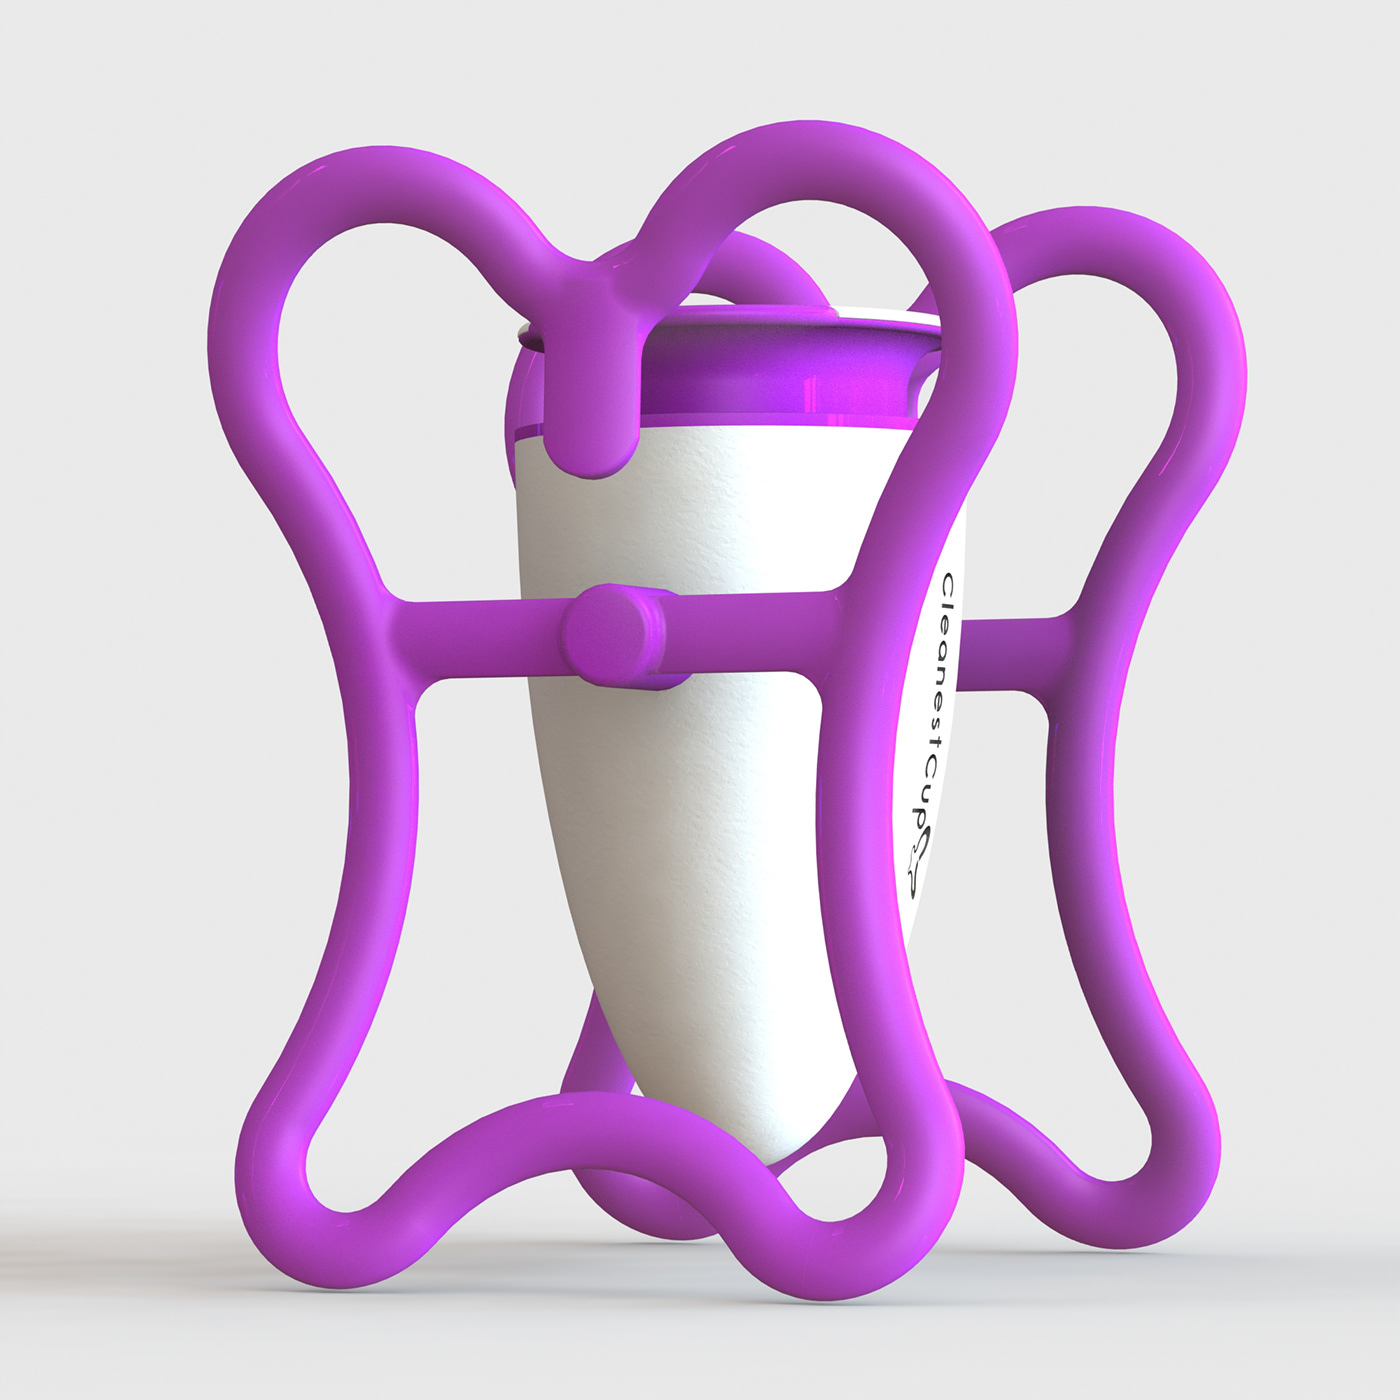 sippy cup beaker cup Cleanest cup manufacturing design 3D Modelling 3D Rendering product design  industrial design  todlers